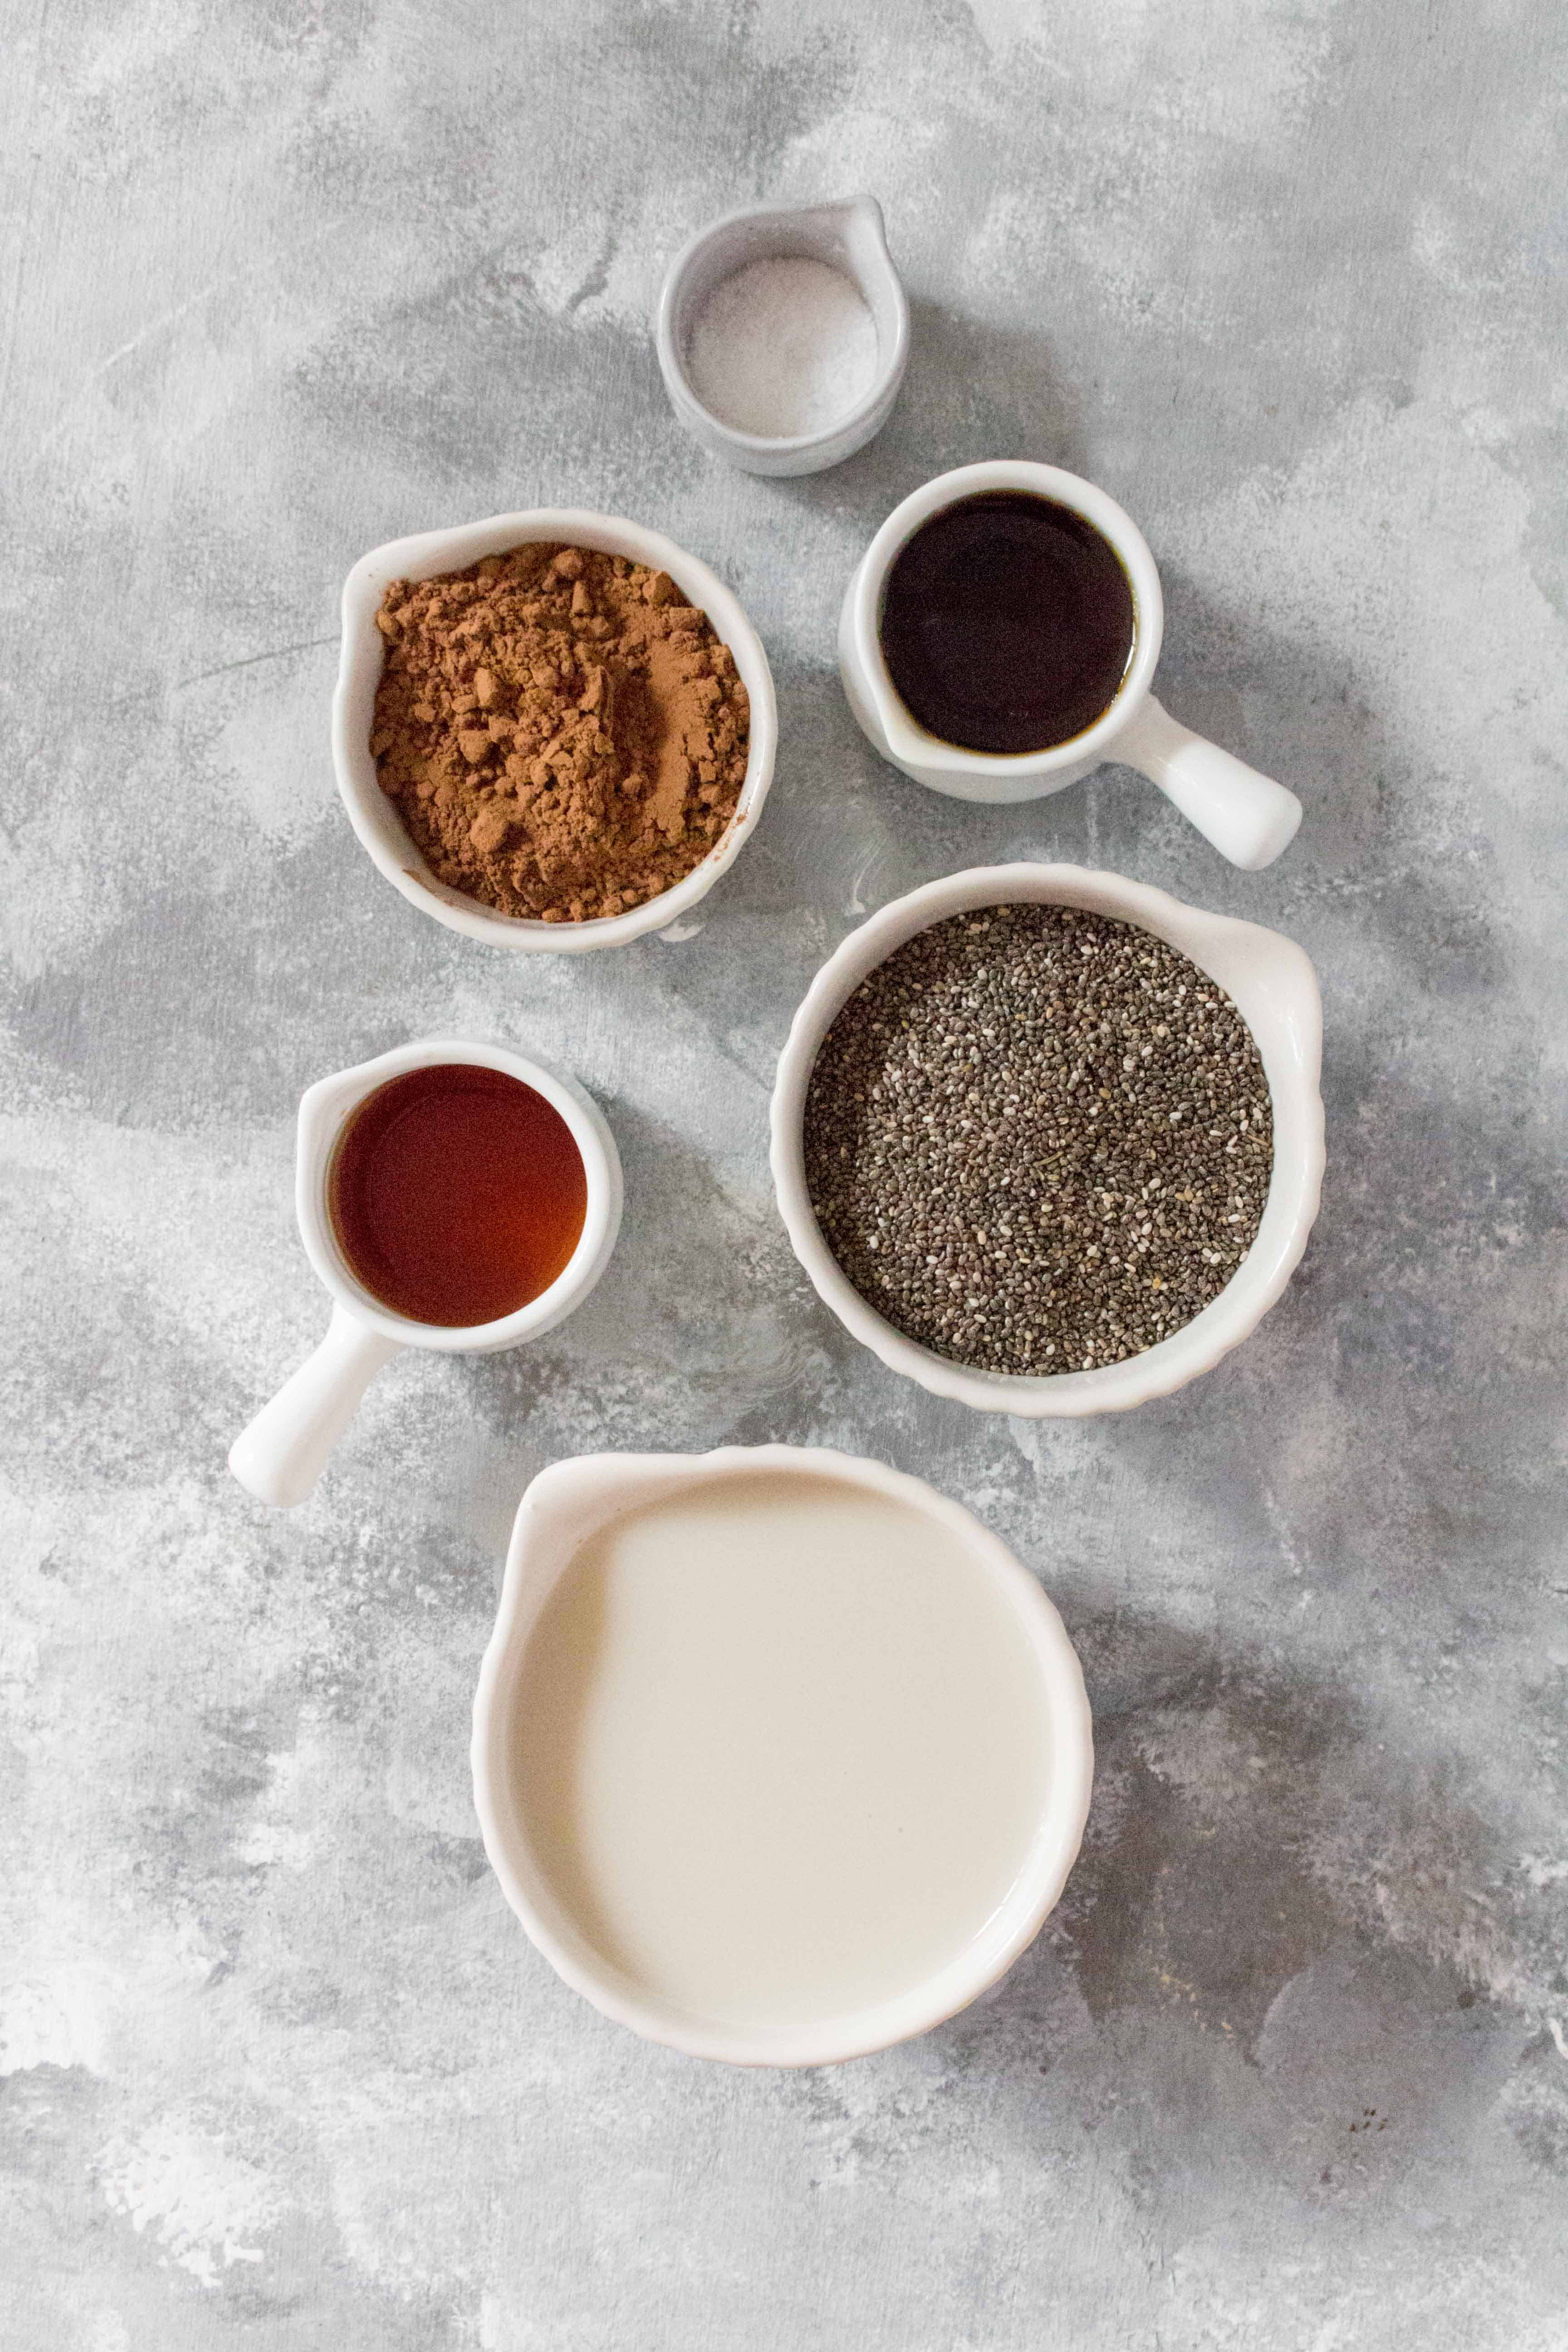 What You'll Need For The Chocolate Chia Pudding